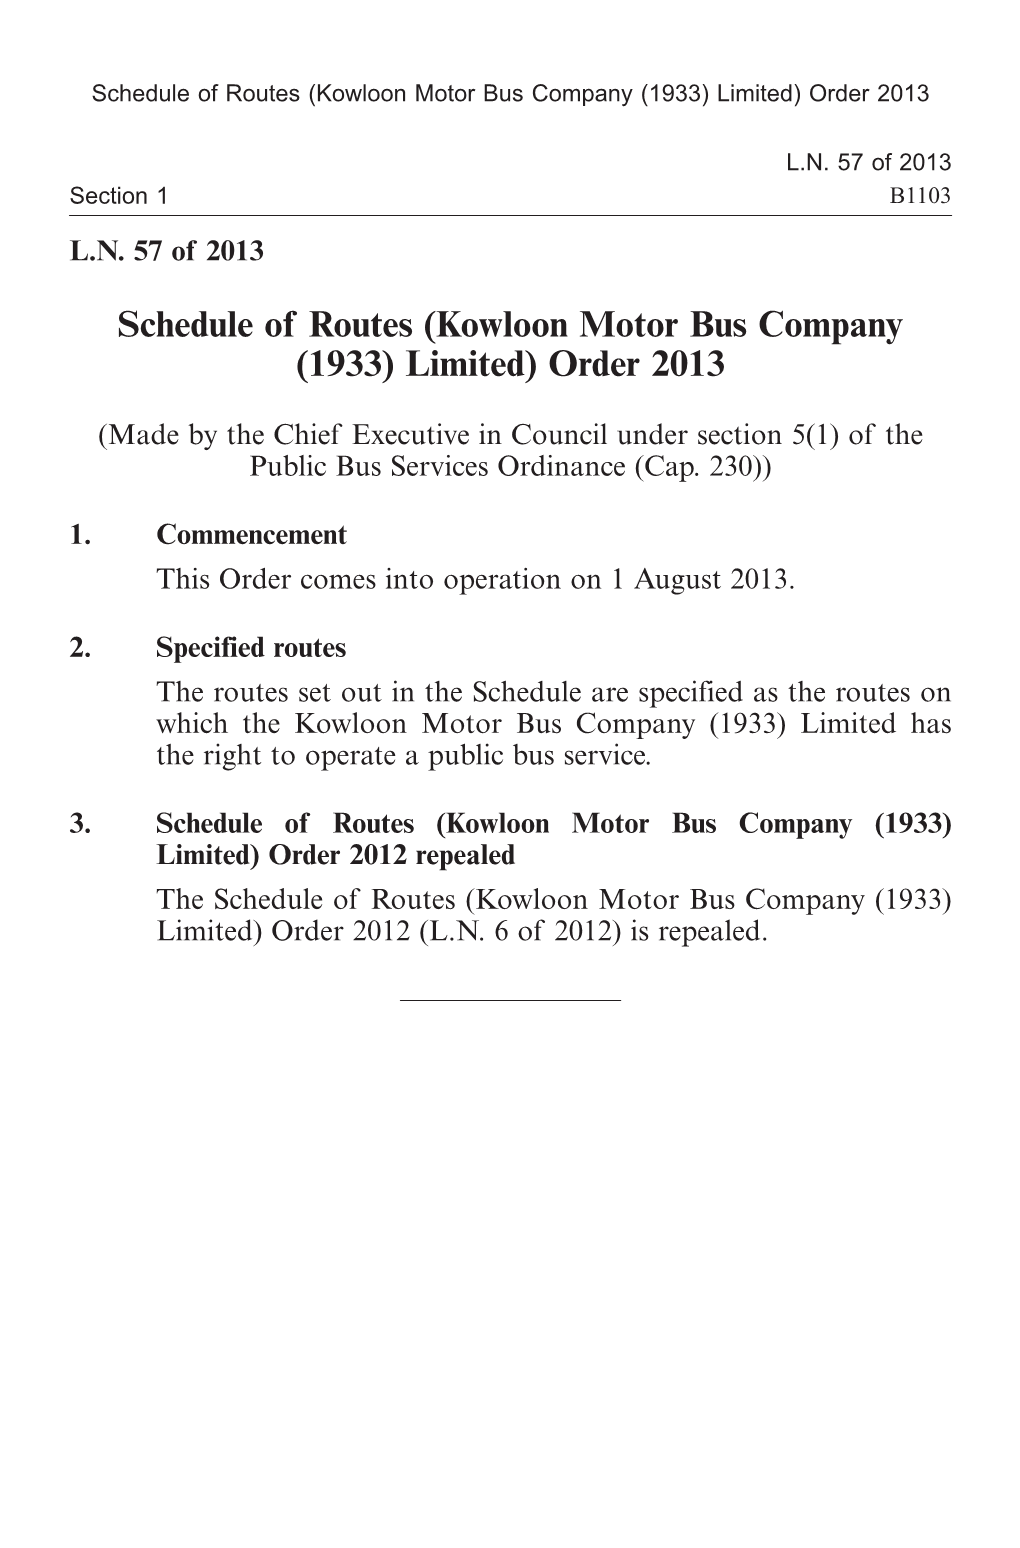 Schedule of Routes (Kowloon Motor Bus Company (1933) Limited) Order 2013